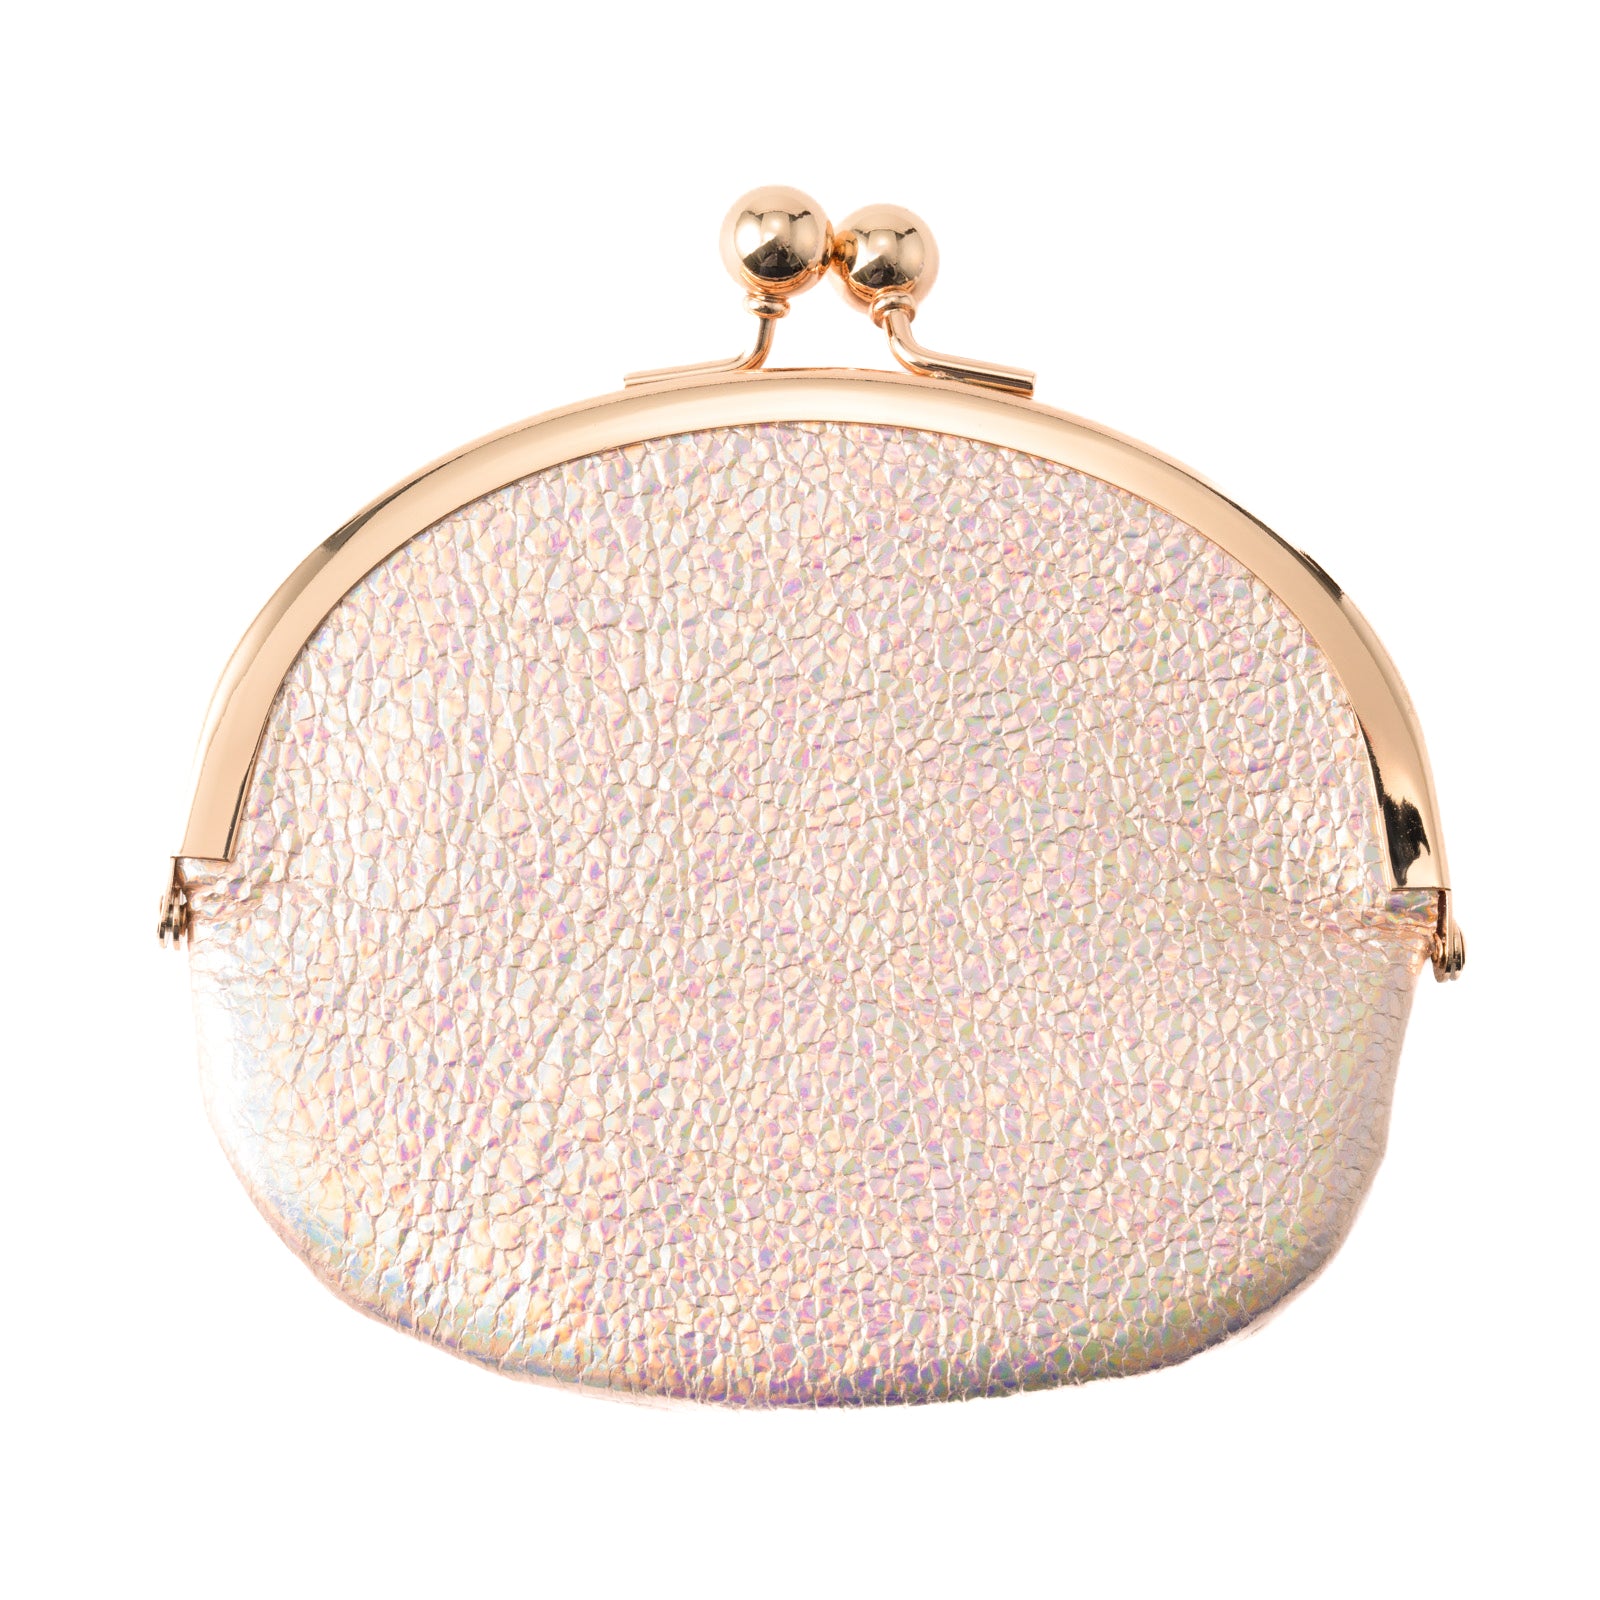 Round pouch prism leather